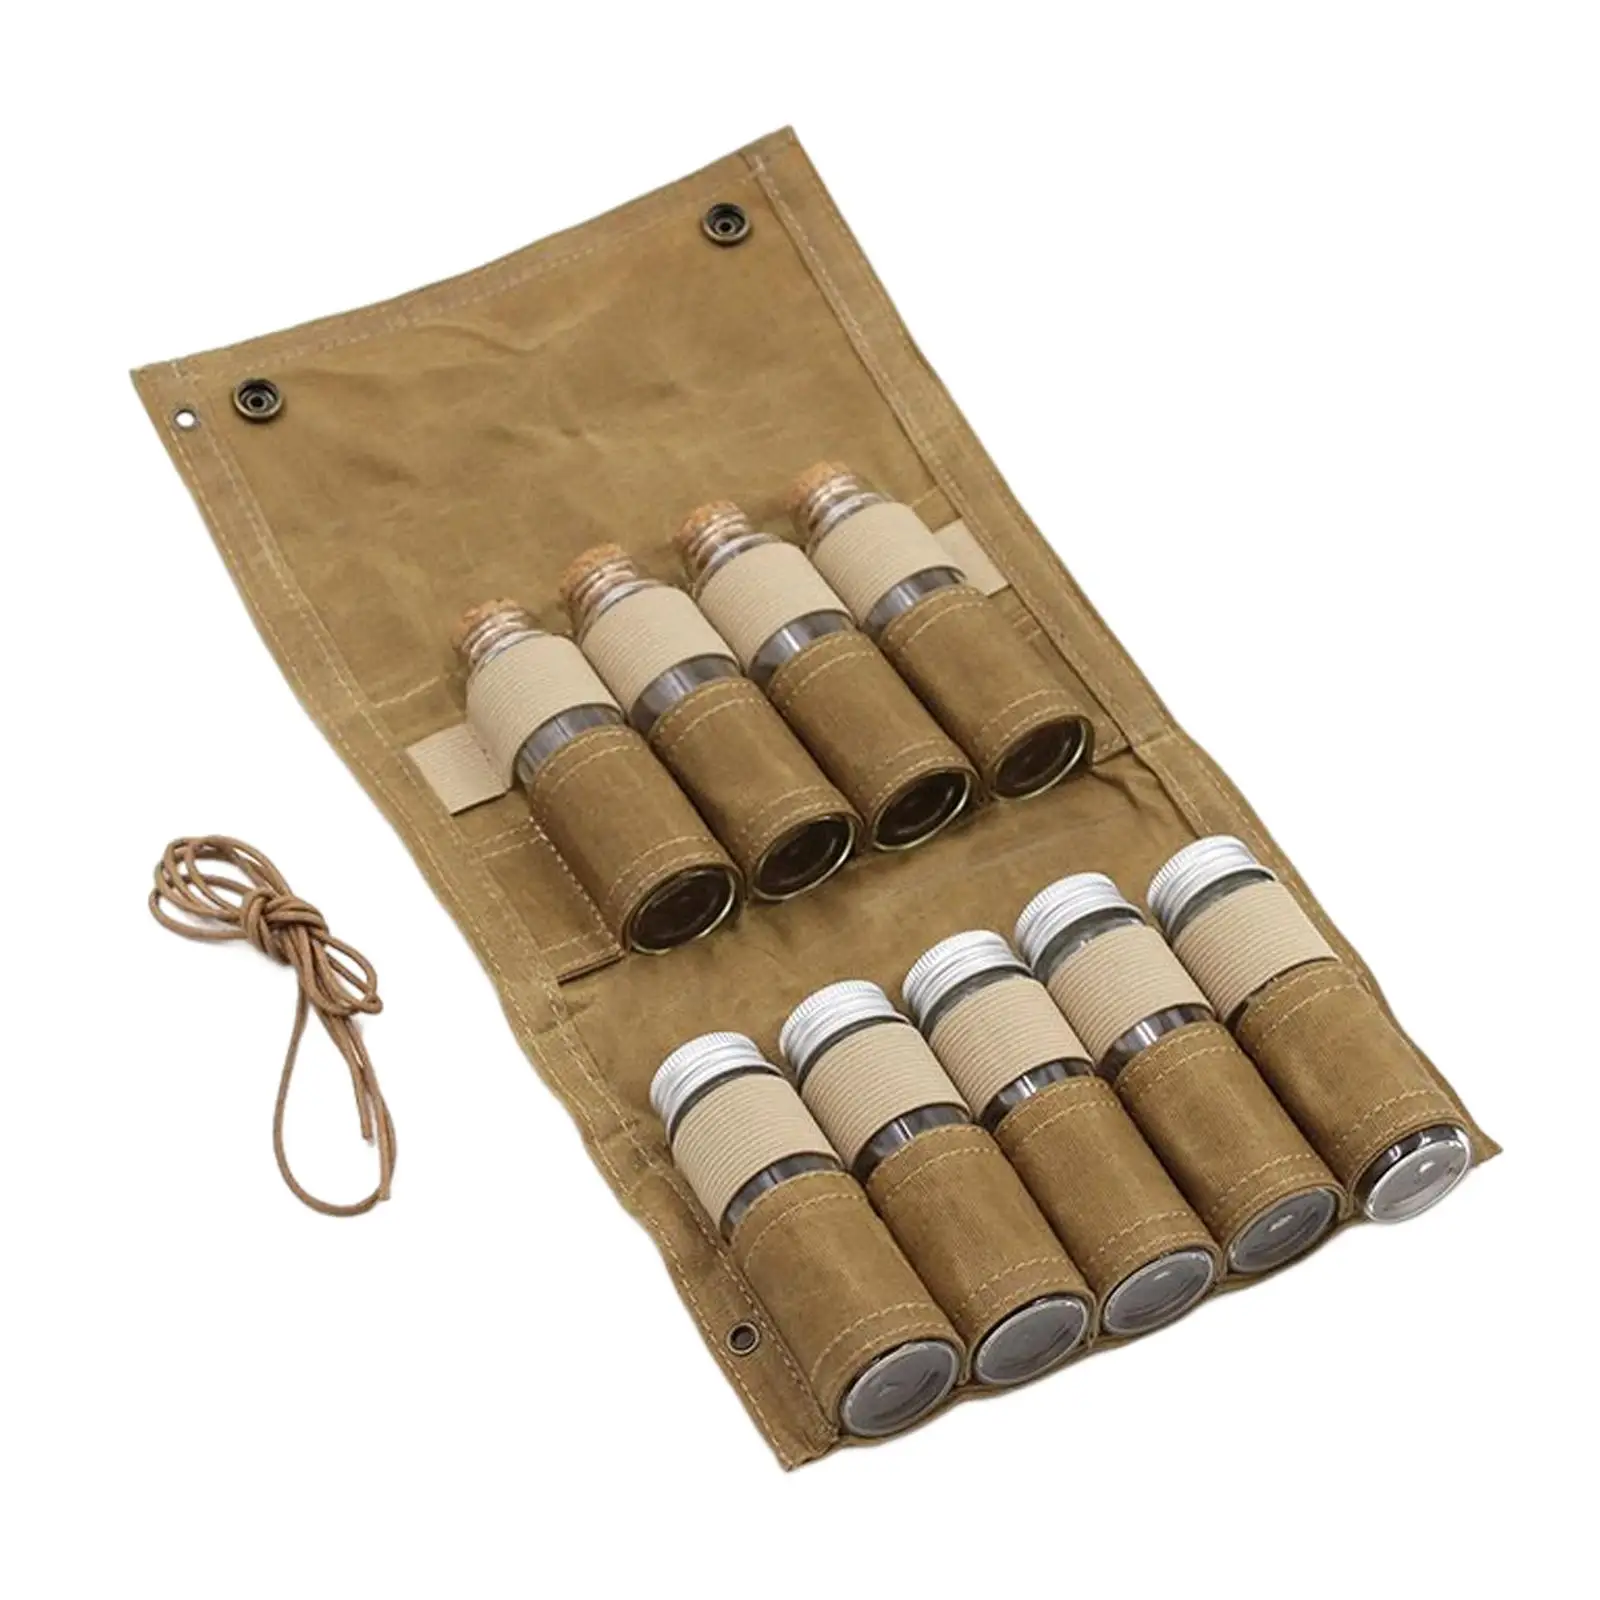 Portable Barbecue Canvas case 9 Spice Jar Mini Holes Set for Hiking Traveling